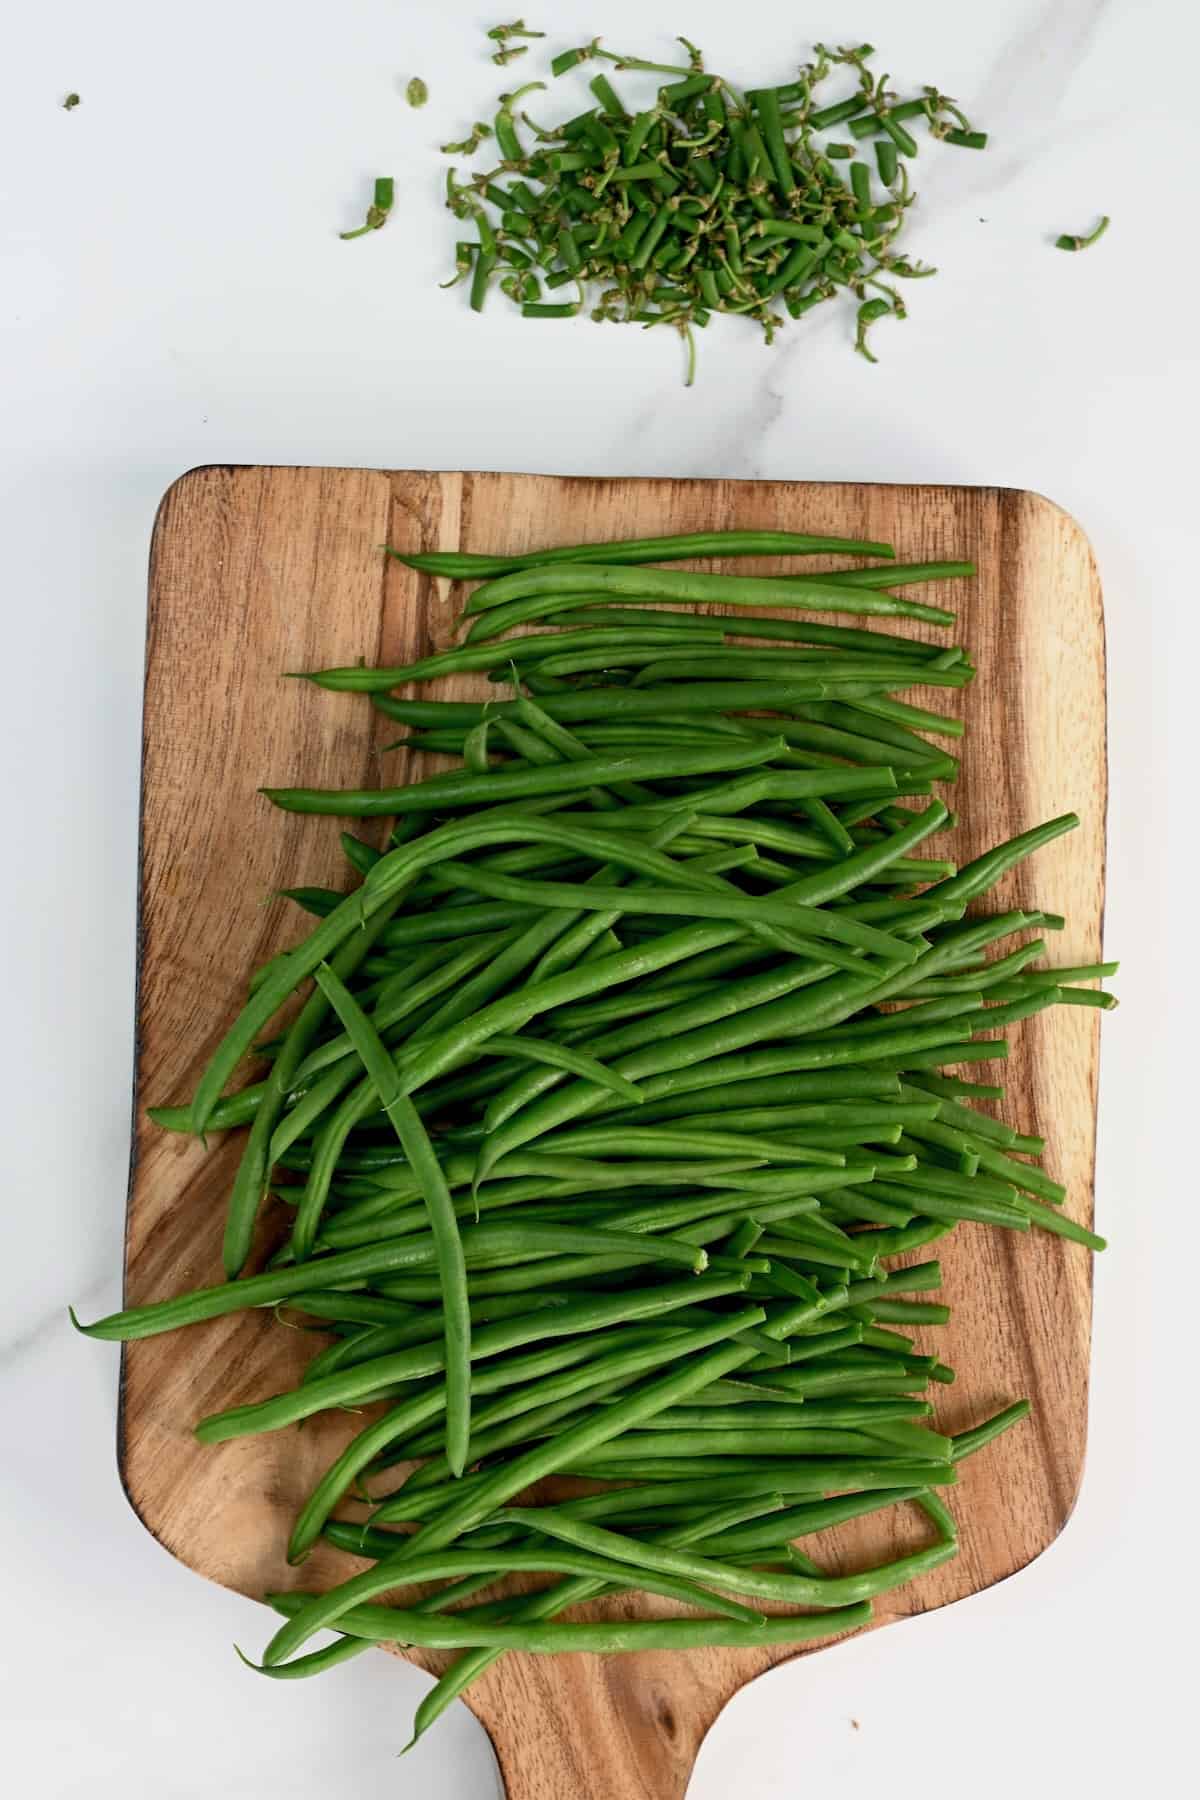 Green beans with trimmed eds on a chopping board